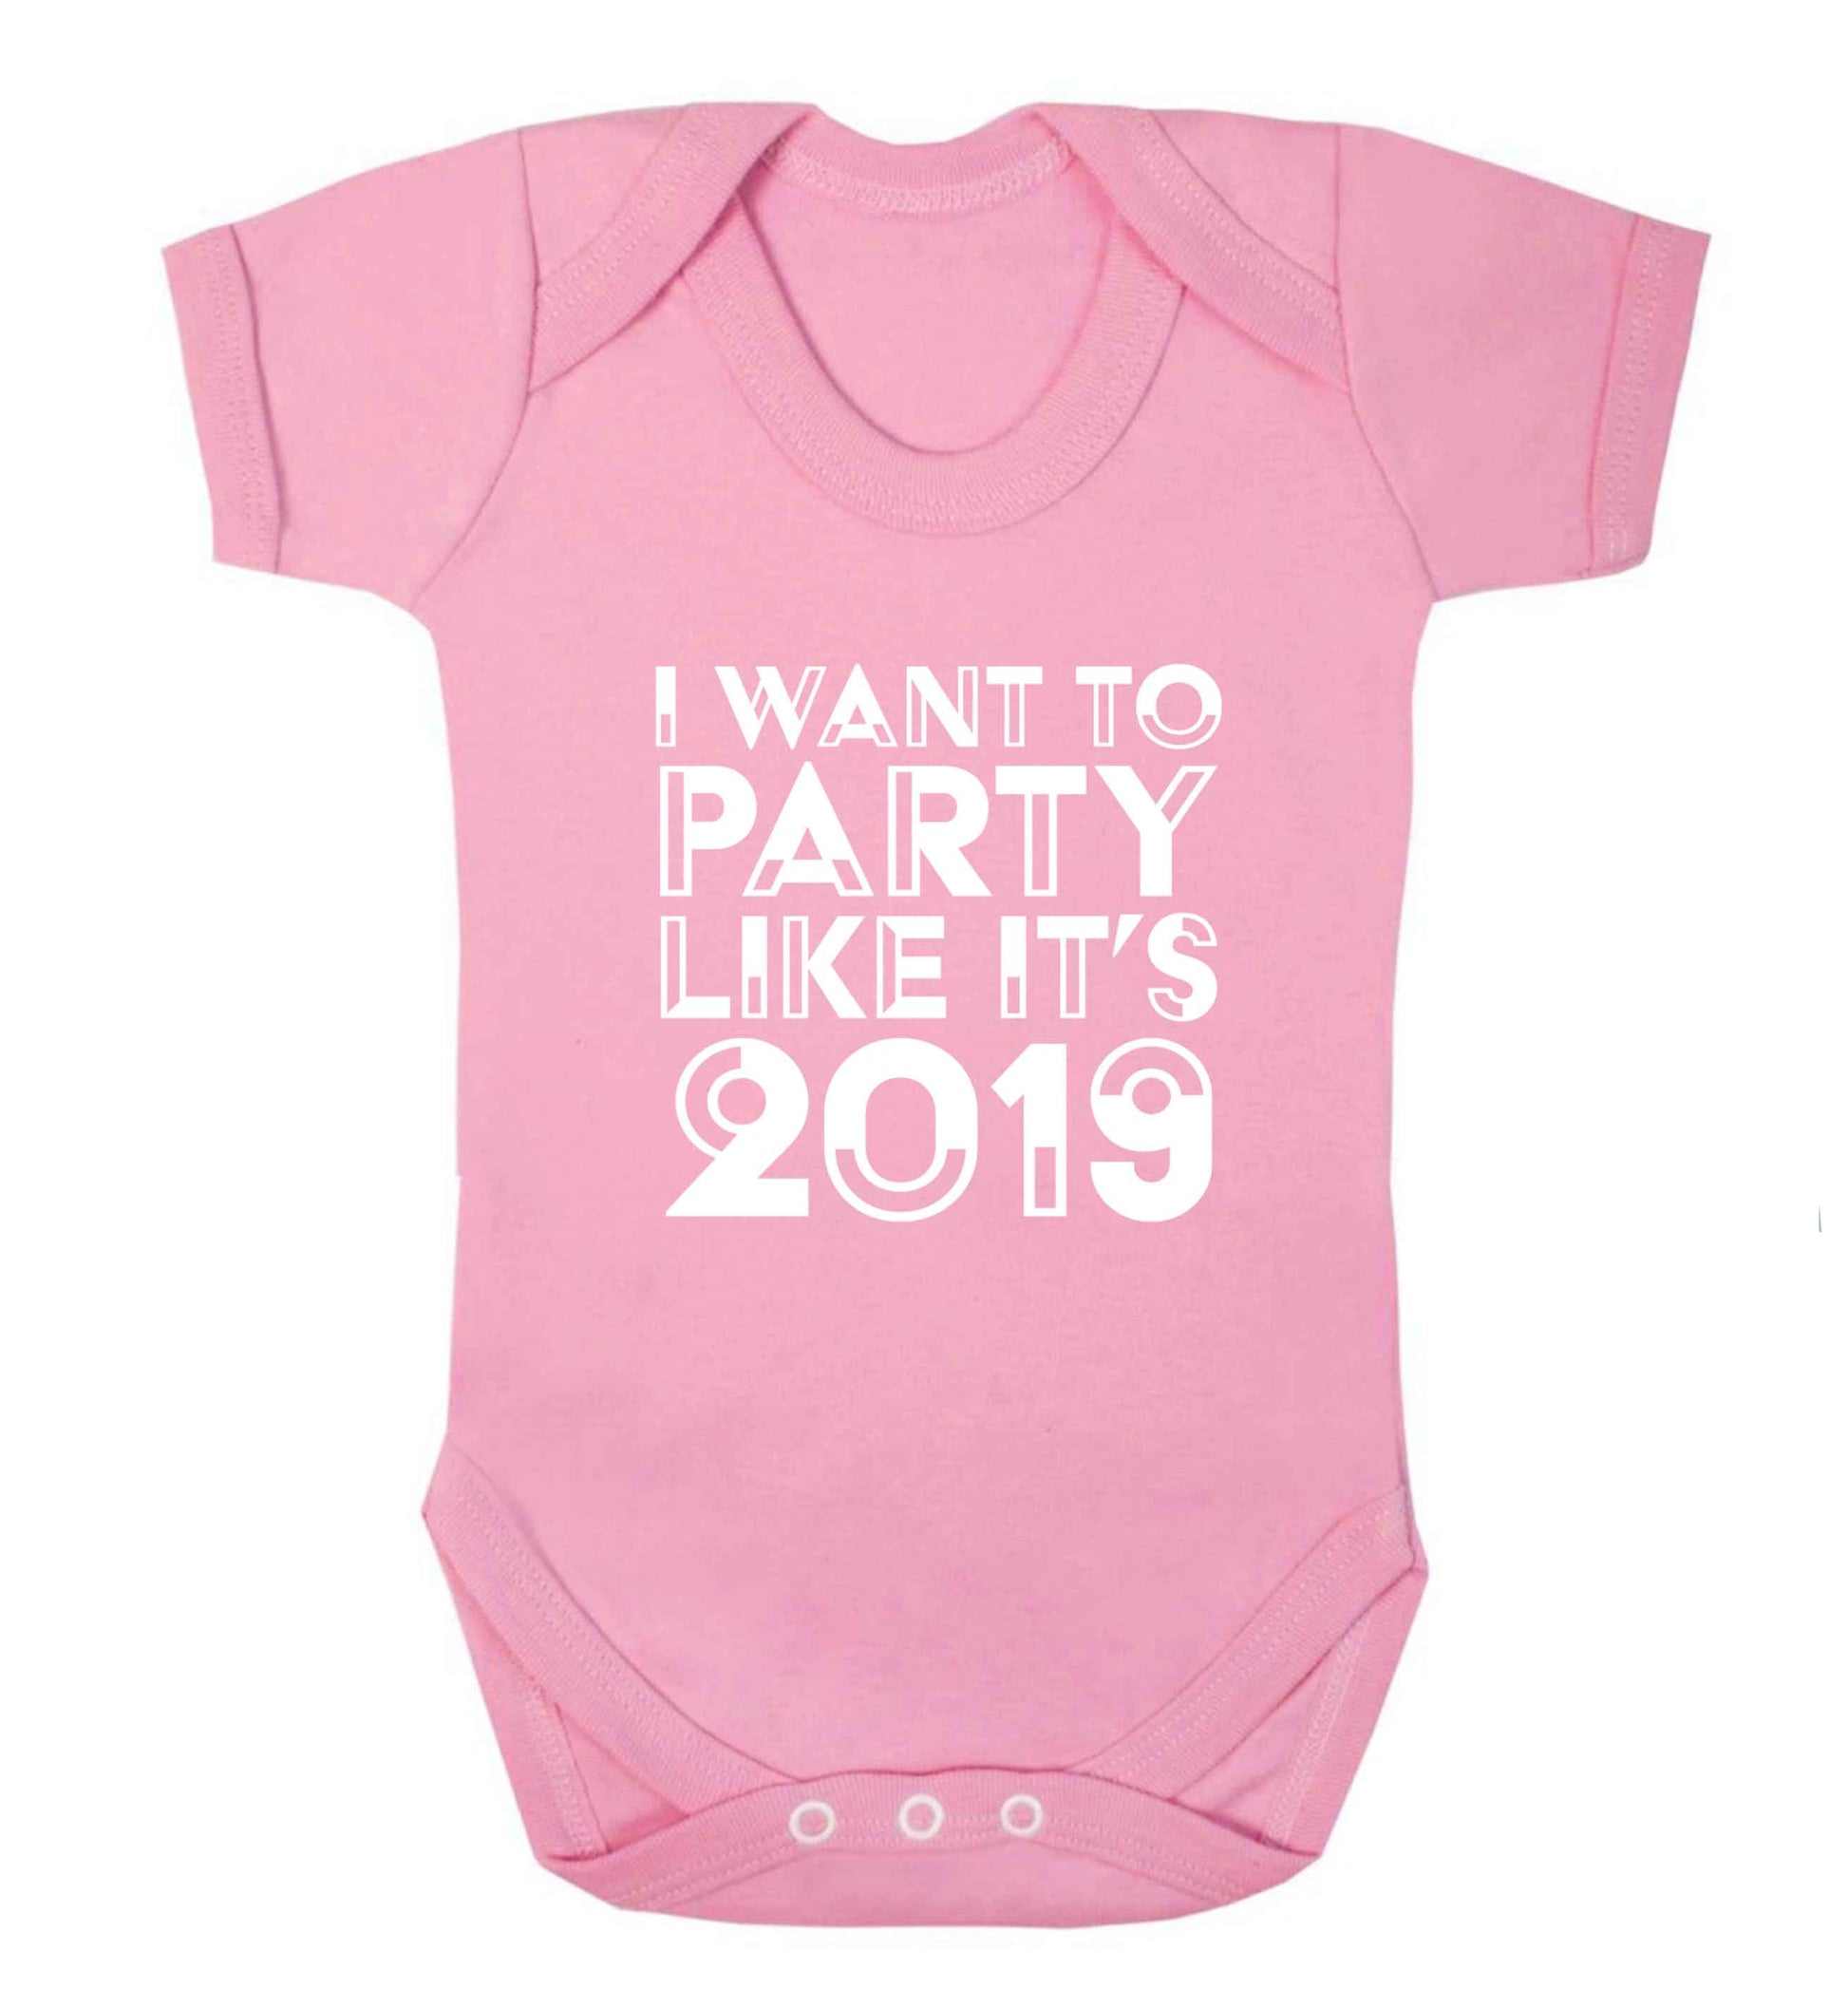 I want to party like it's 2019 baby vest pale pink 18-24 months